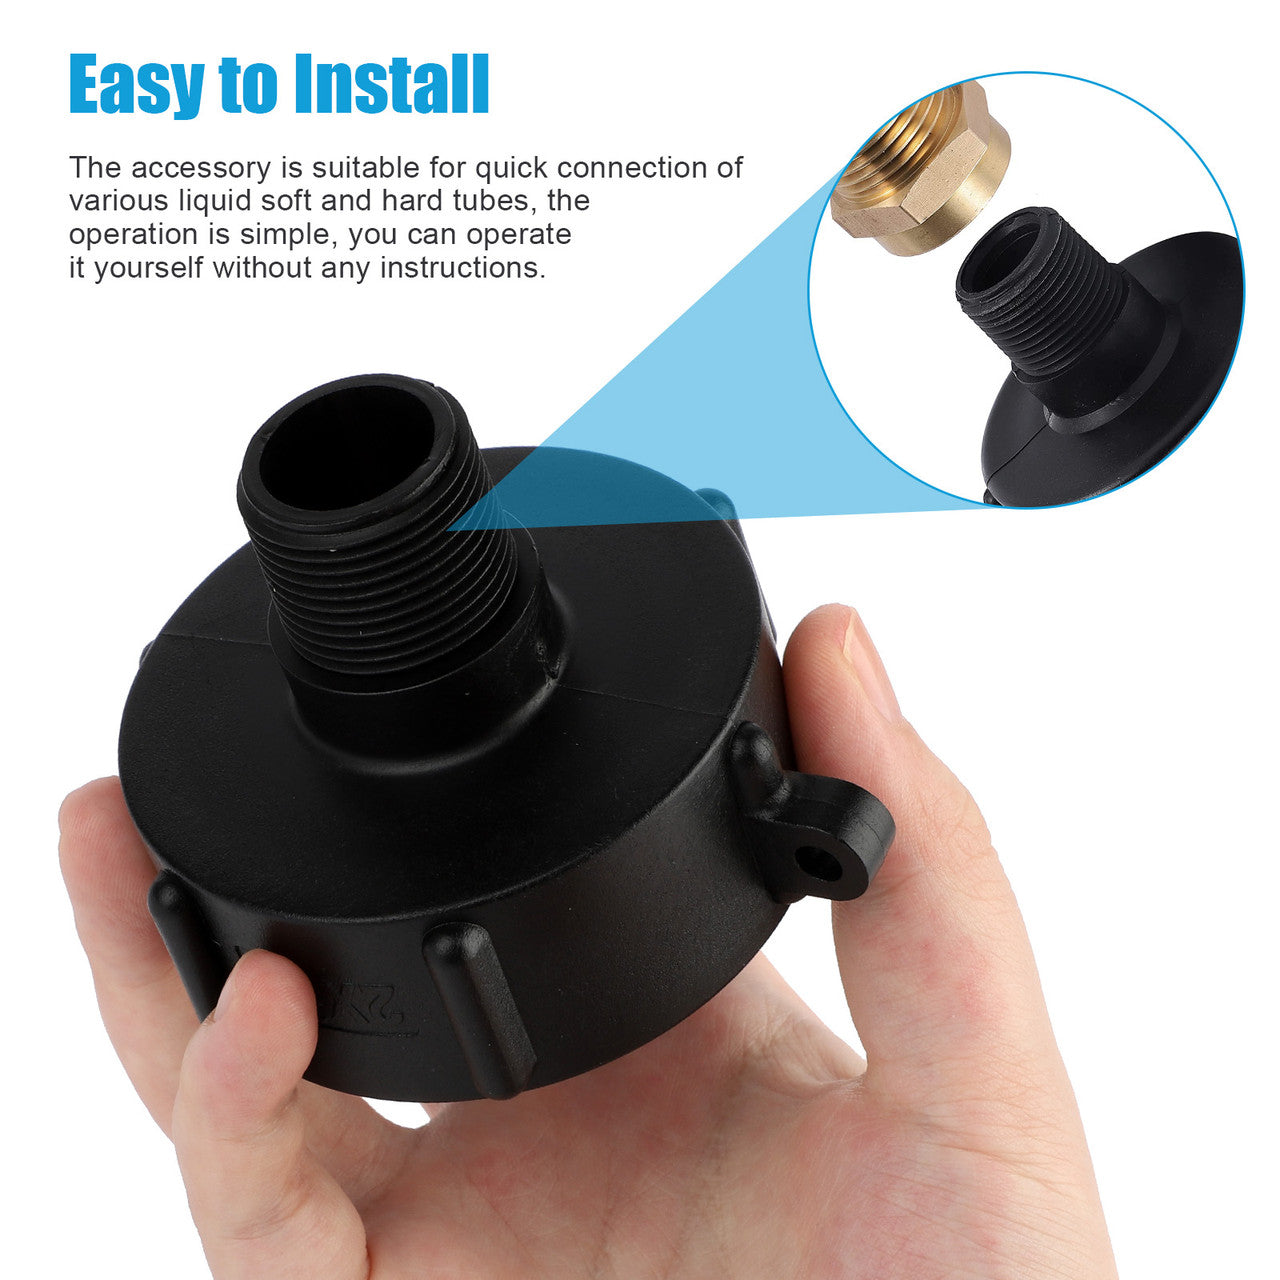 IBC Tote Tank Adapter Fine Thrd 2" with Leak Proof Protection, Simple and Durable, Connector